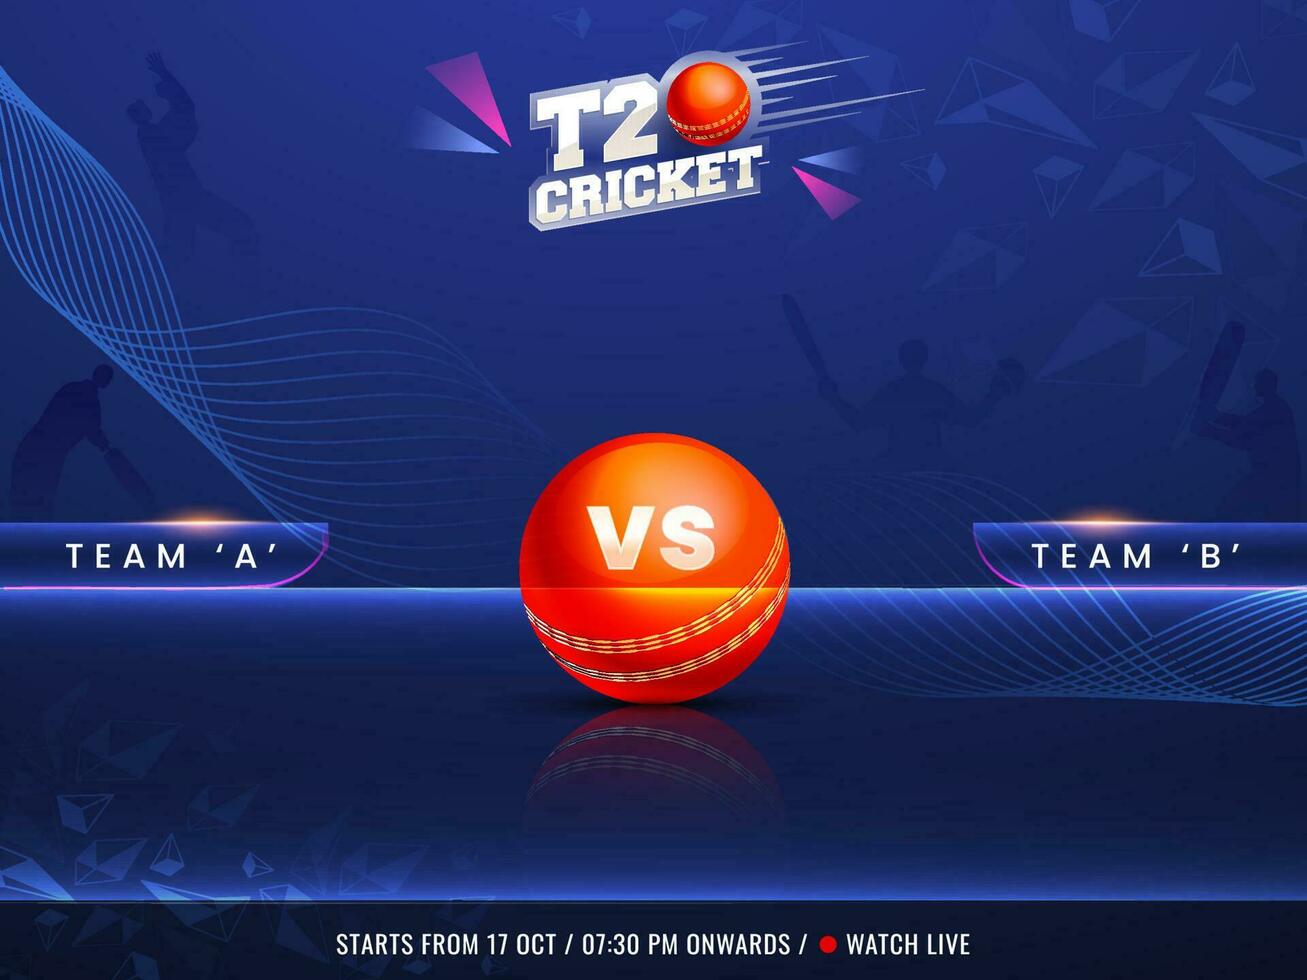 T20 Cricket Watch Live Concept With Participating Team A VS B, 3D Red Ball And Silhouette Players On Blue Abstract Wave Background. vector